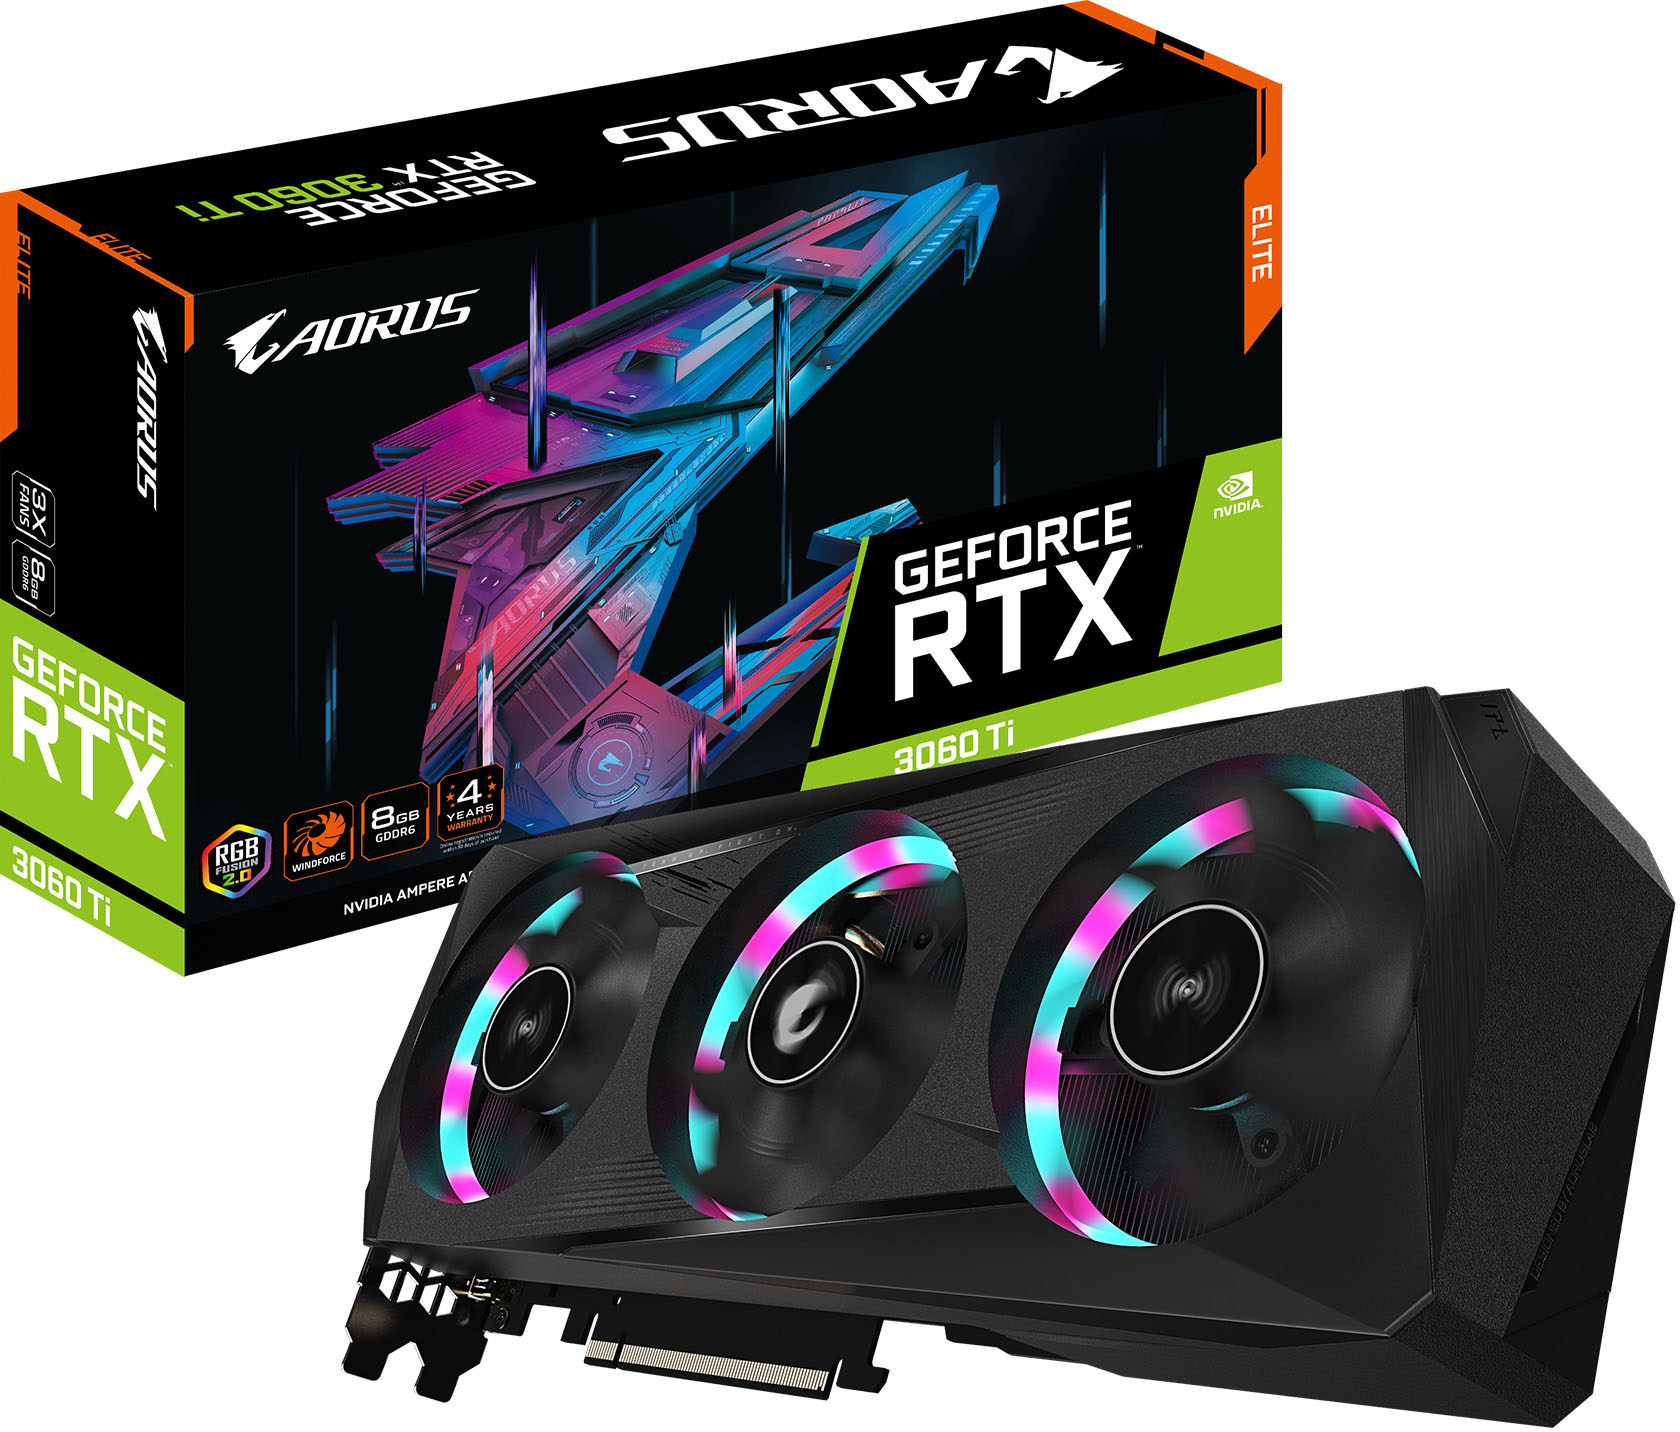 The GeForce RTX 3060 Ti Lineup: Which Graphics Card Is Right for You?